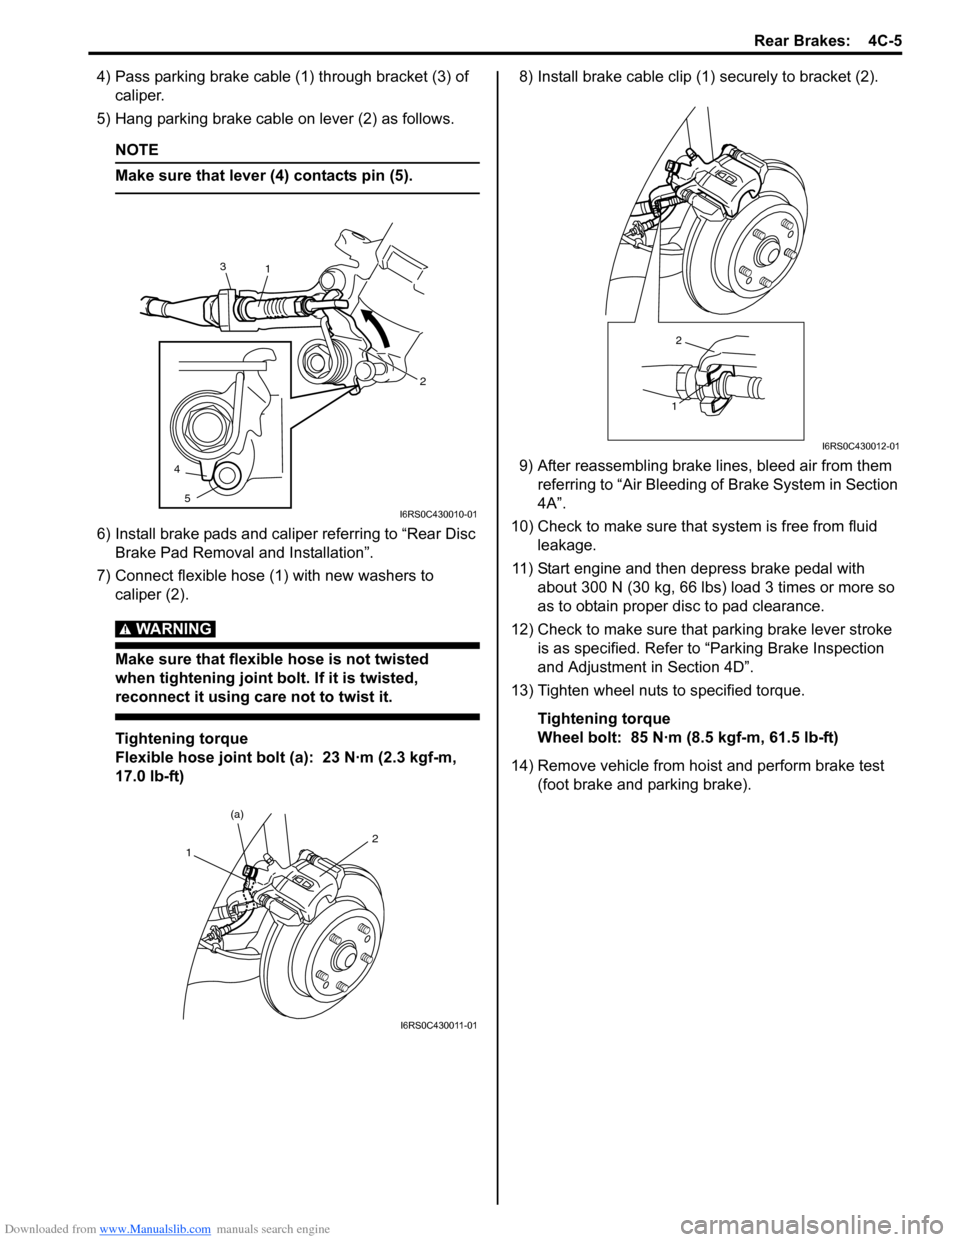 SUZUKI SWIFT 2008 2.G Service Owners Manual Downloaded from www.Manualslib.com manuals search engine Rear Brakes:  4C-5
4) Pass parking brake cable (1) through bracket (3) of caliper.
5) Hang parking brake cable on lever (2) as follows.
NOTE
Ma